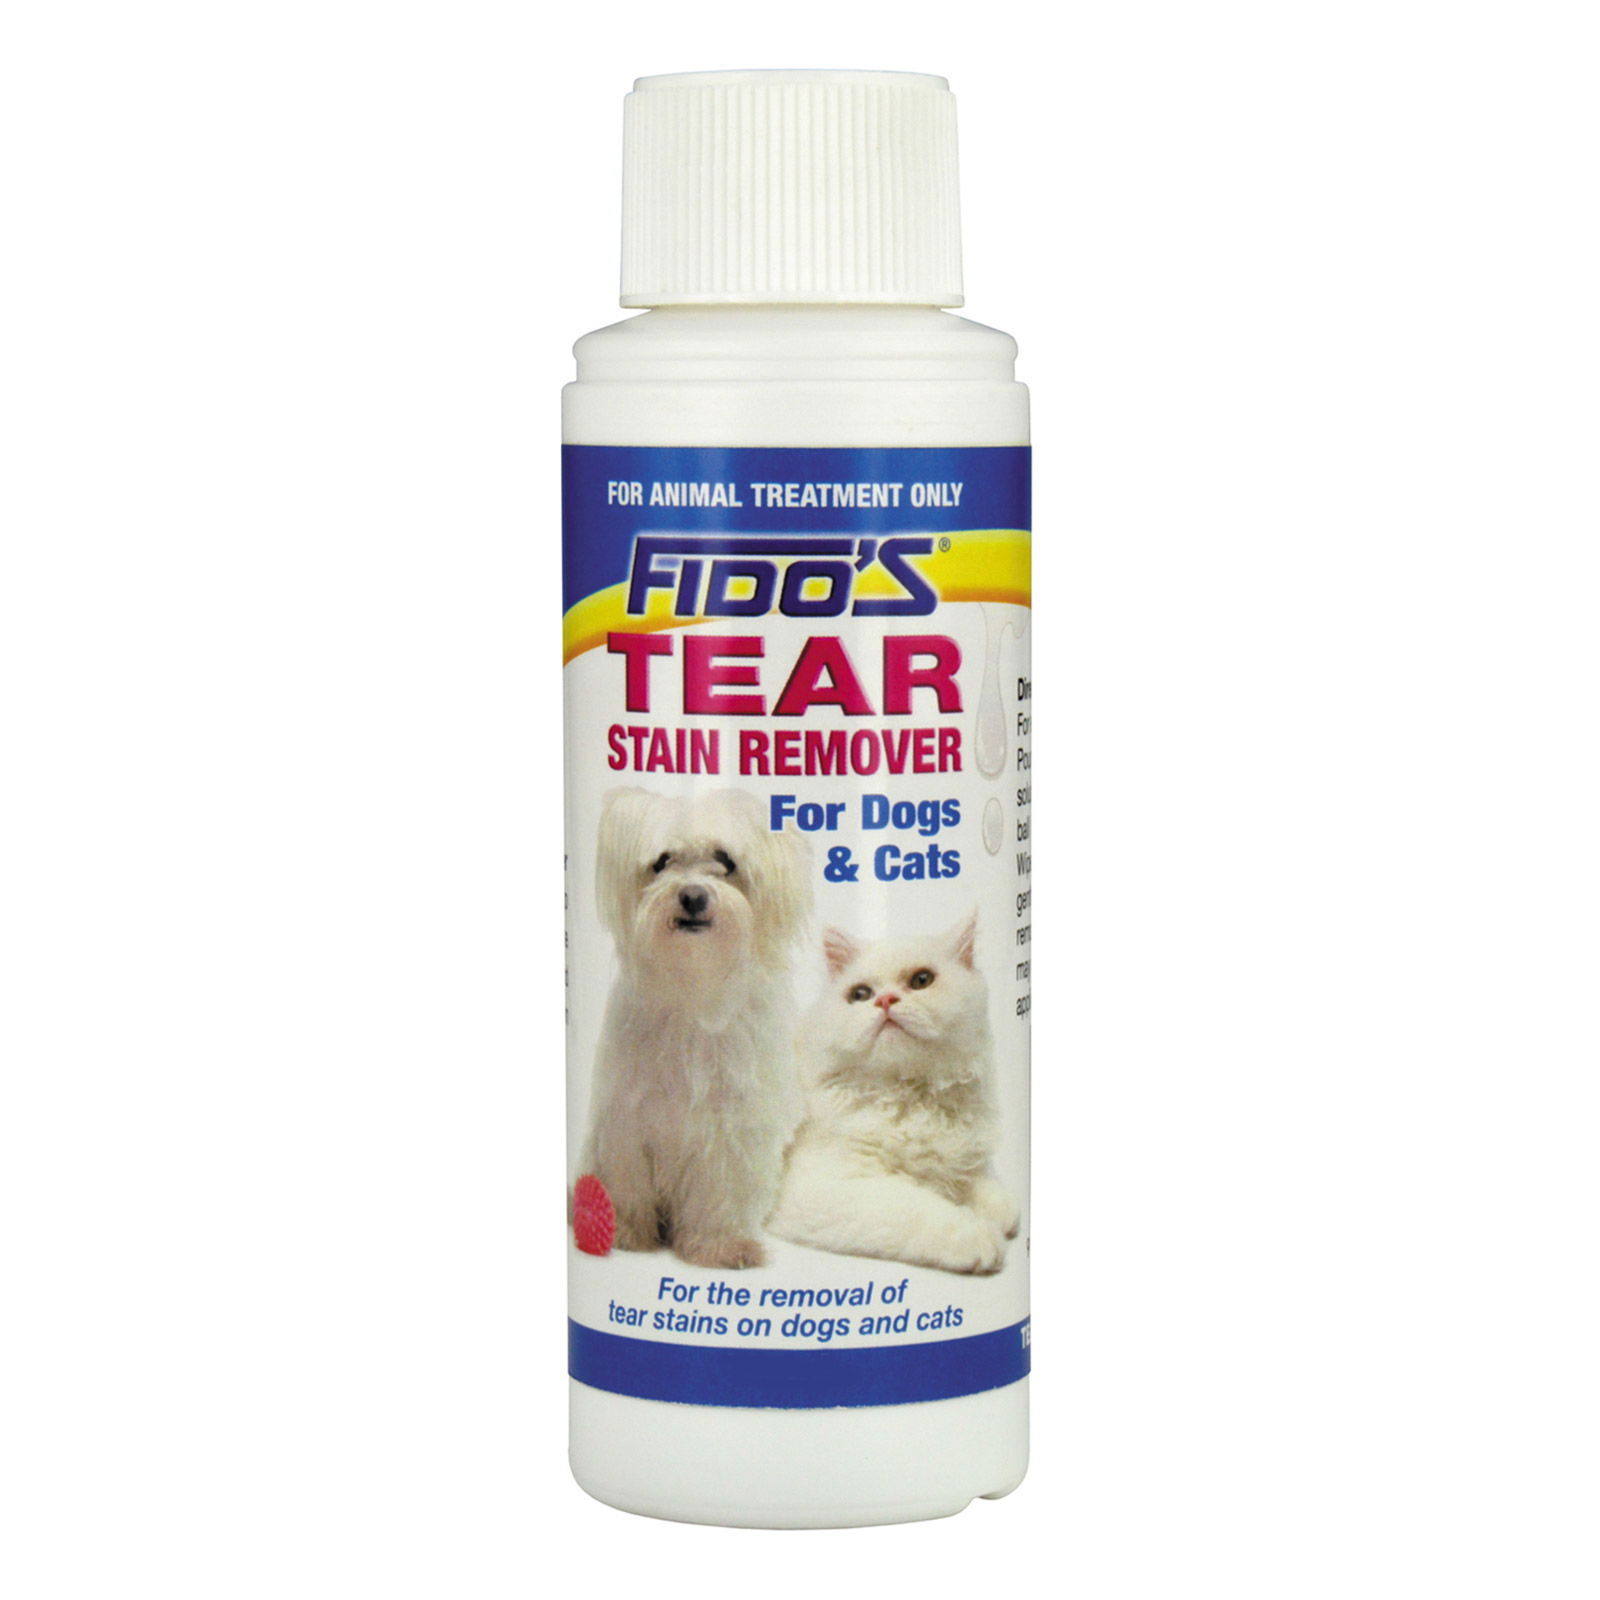 Fido's Tear Stain Remover for Cats & Dogs for Pet Hygiene